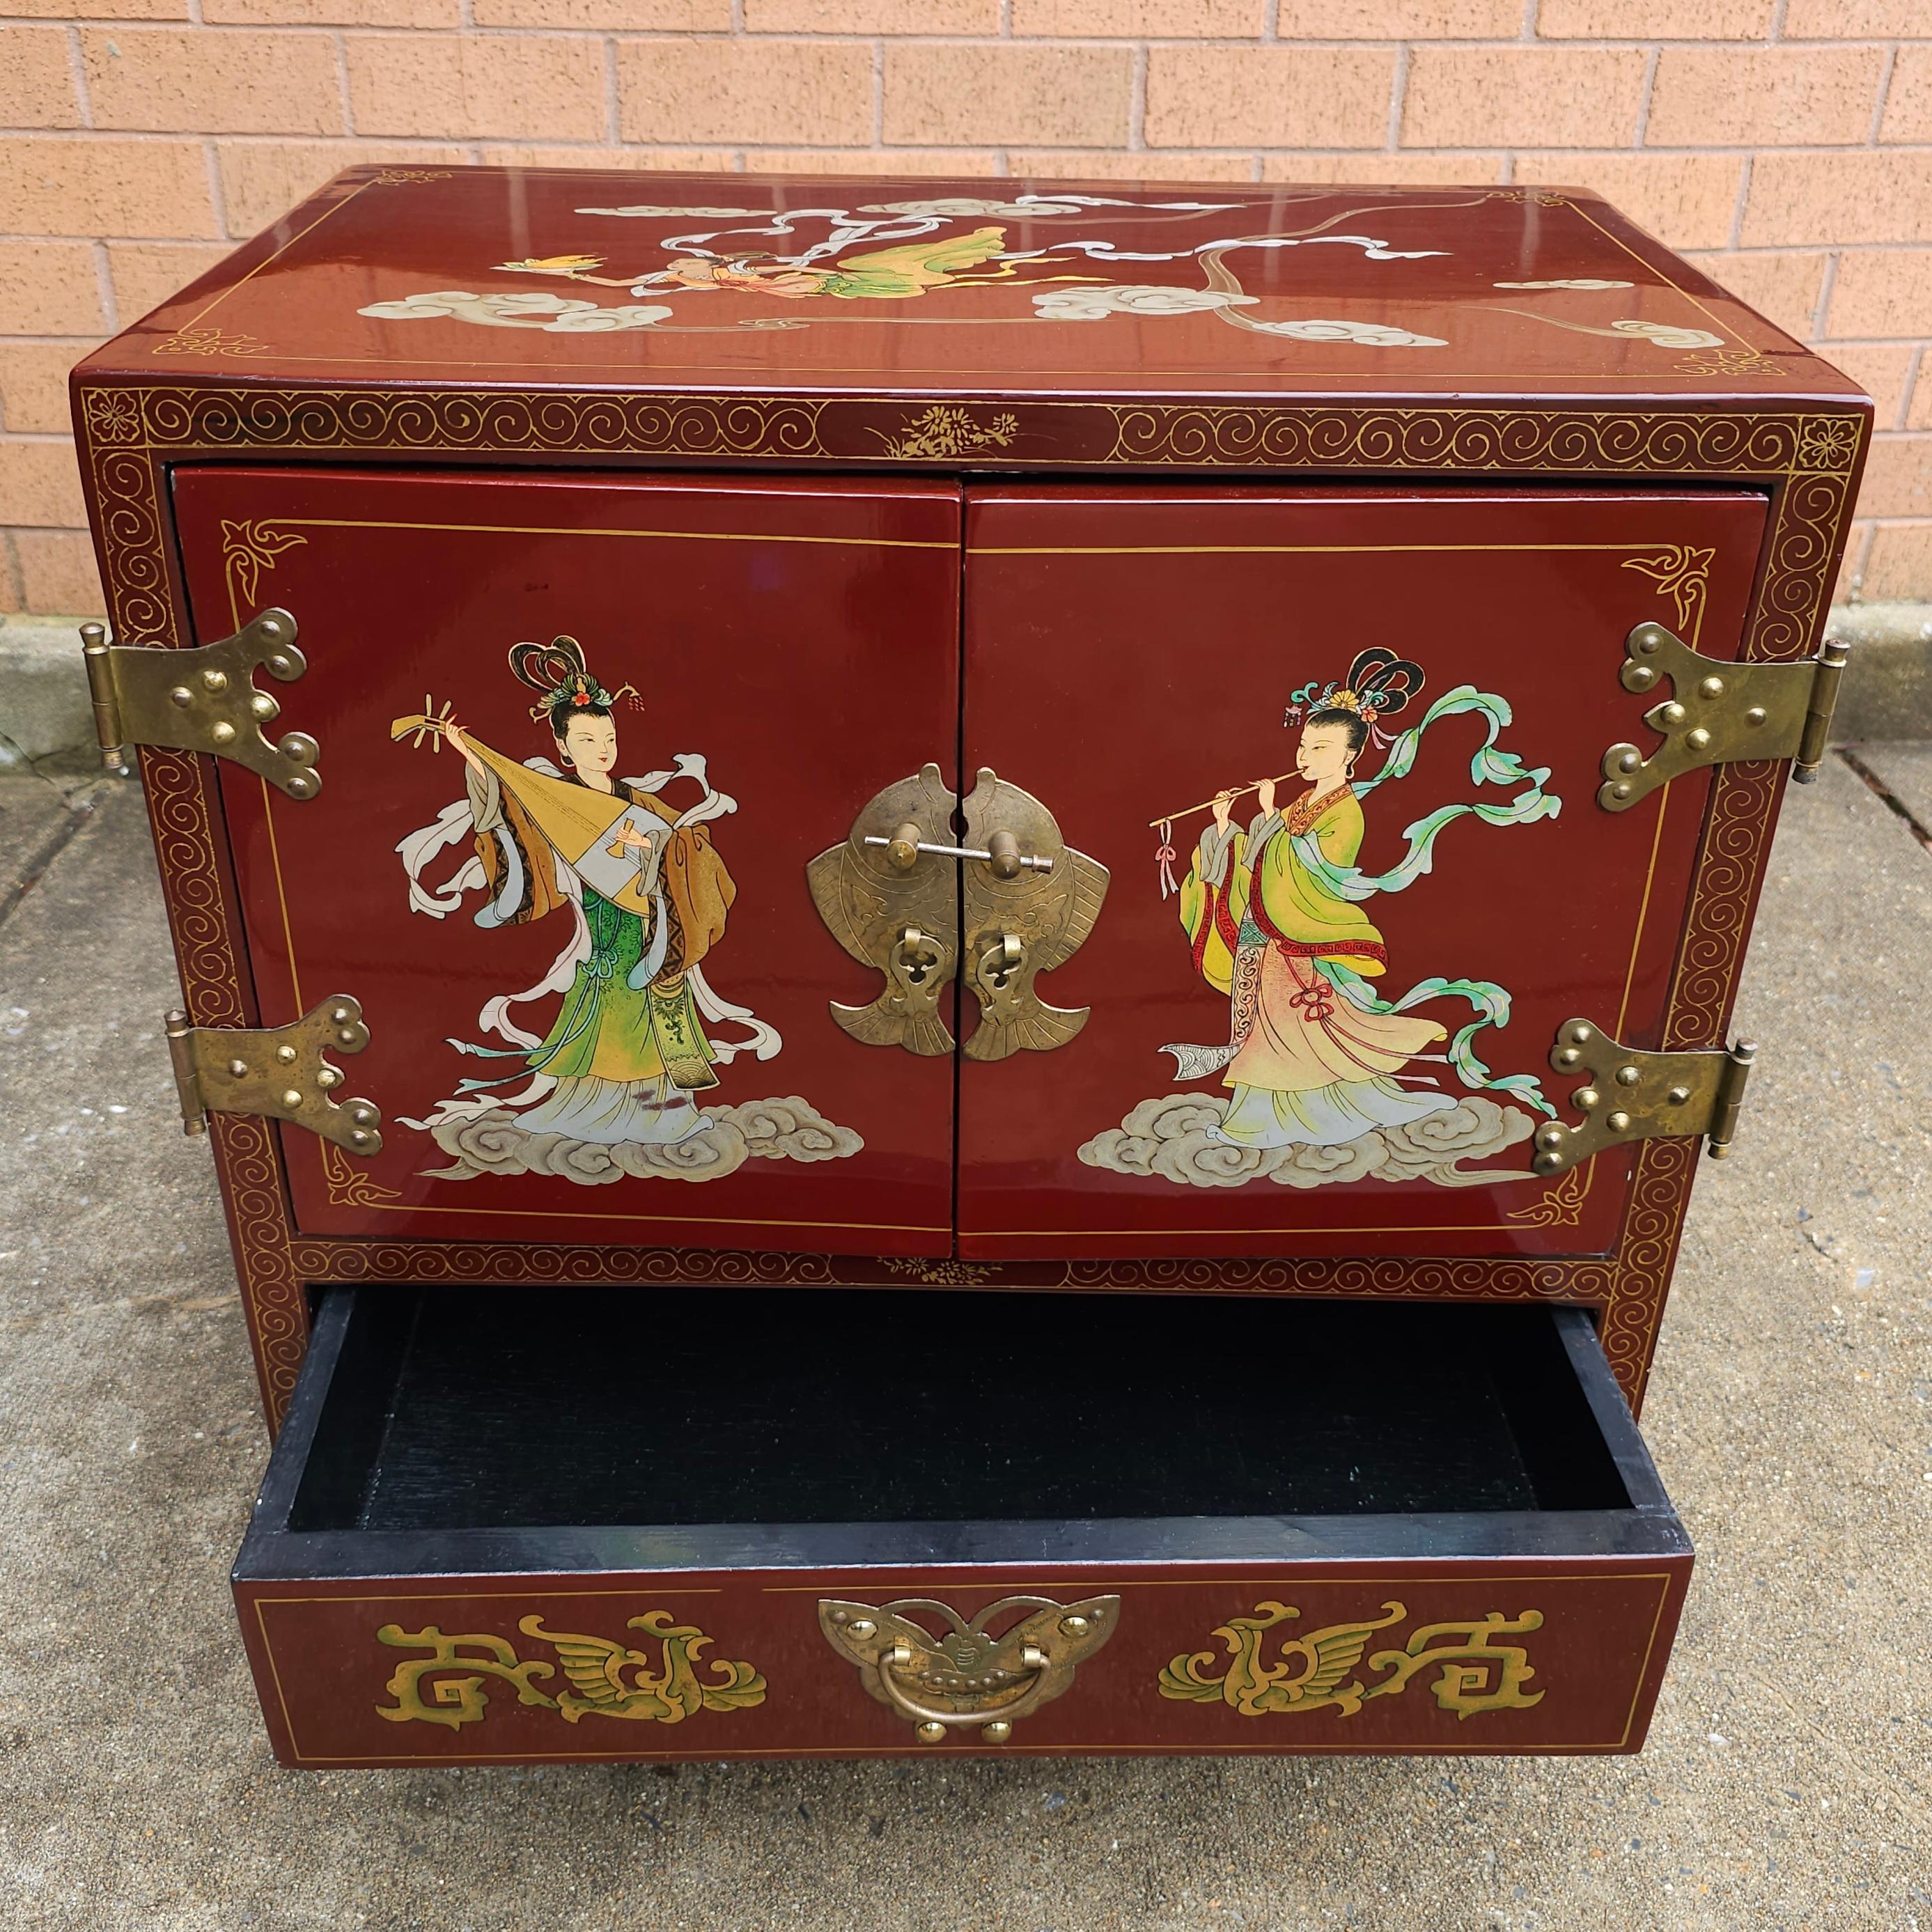 A 20th Century Hand Painted and Decorated Chinoiserie Red Lacquered Side Cabinet. Great vintage condition. 